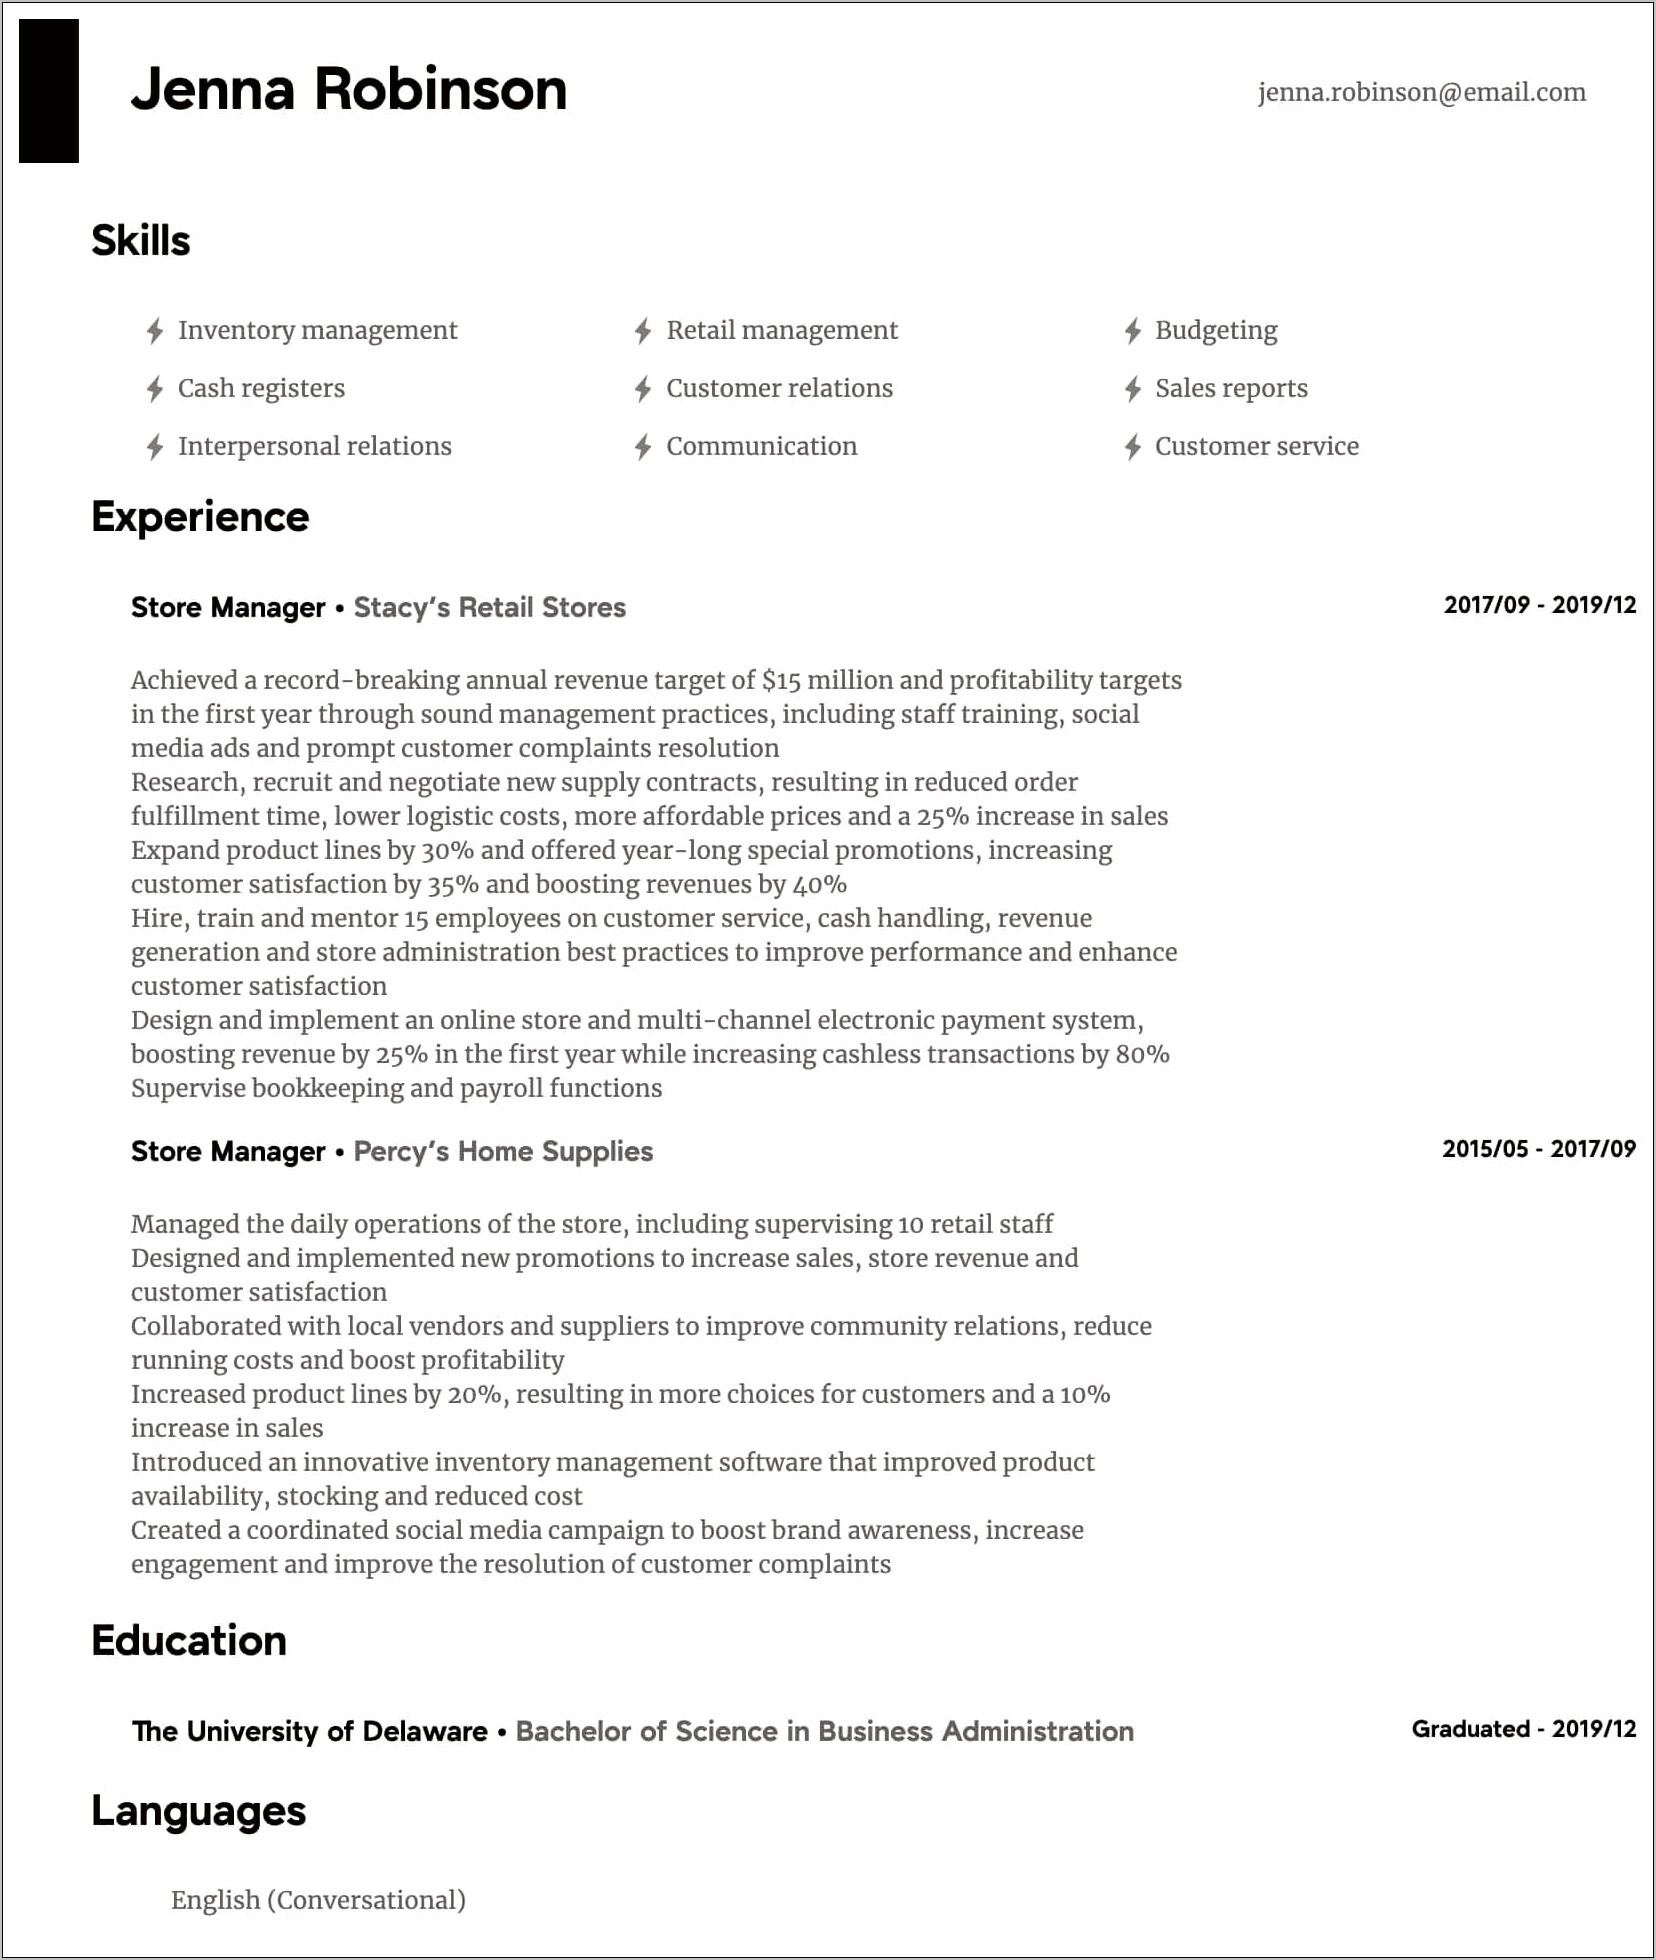 Resume Description For A Store Manager